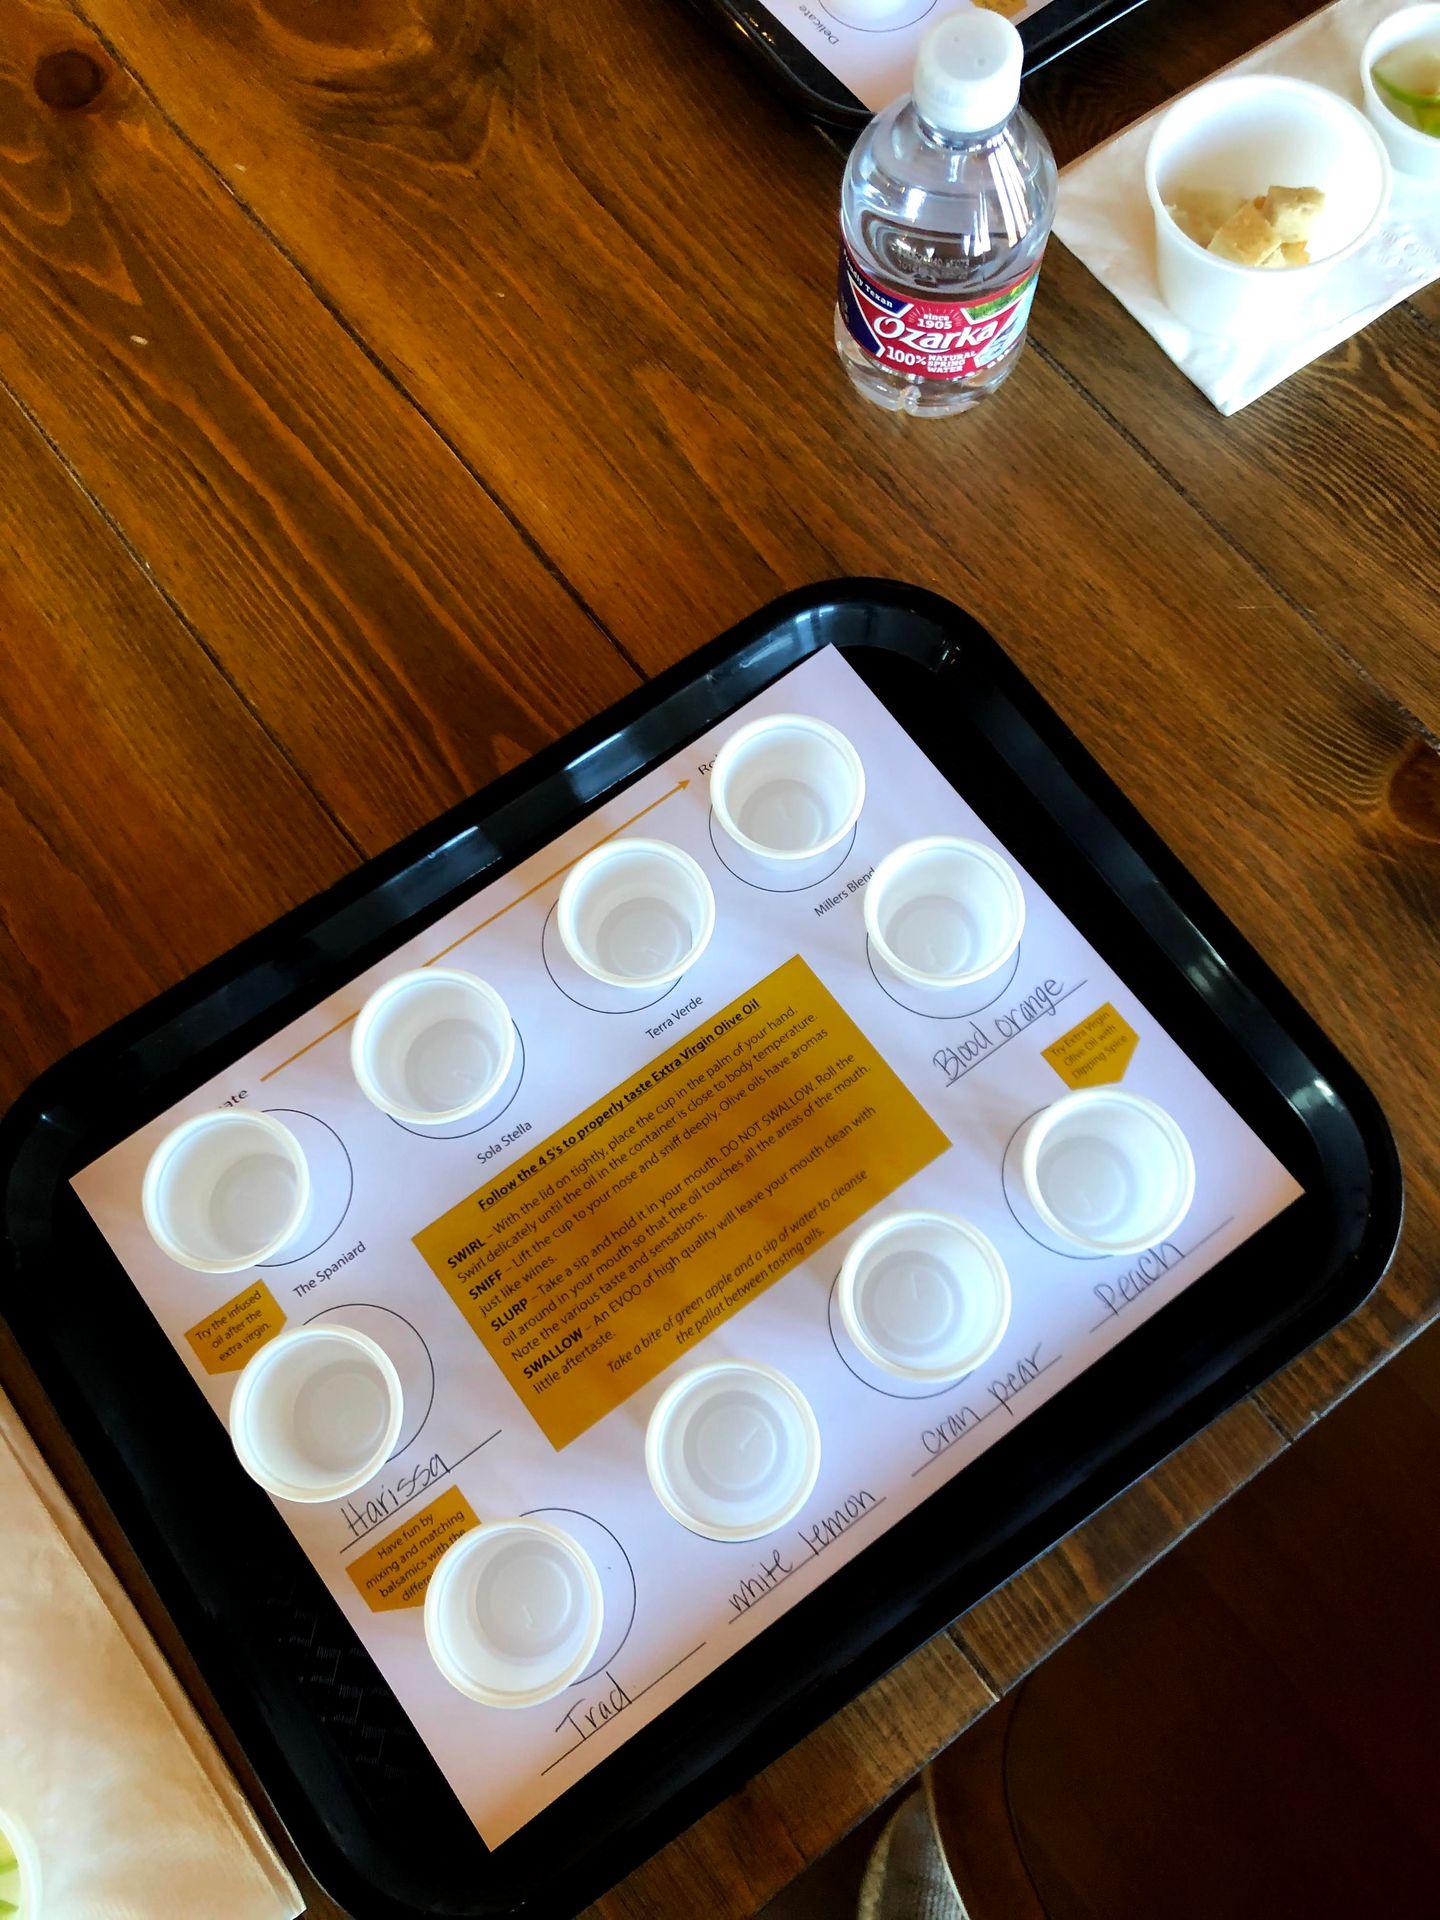 A tray of small plastic cups for olive oil and balsamic tastings. Each one is labeled and flavors include blood orange and white lemon.